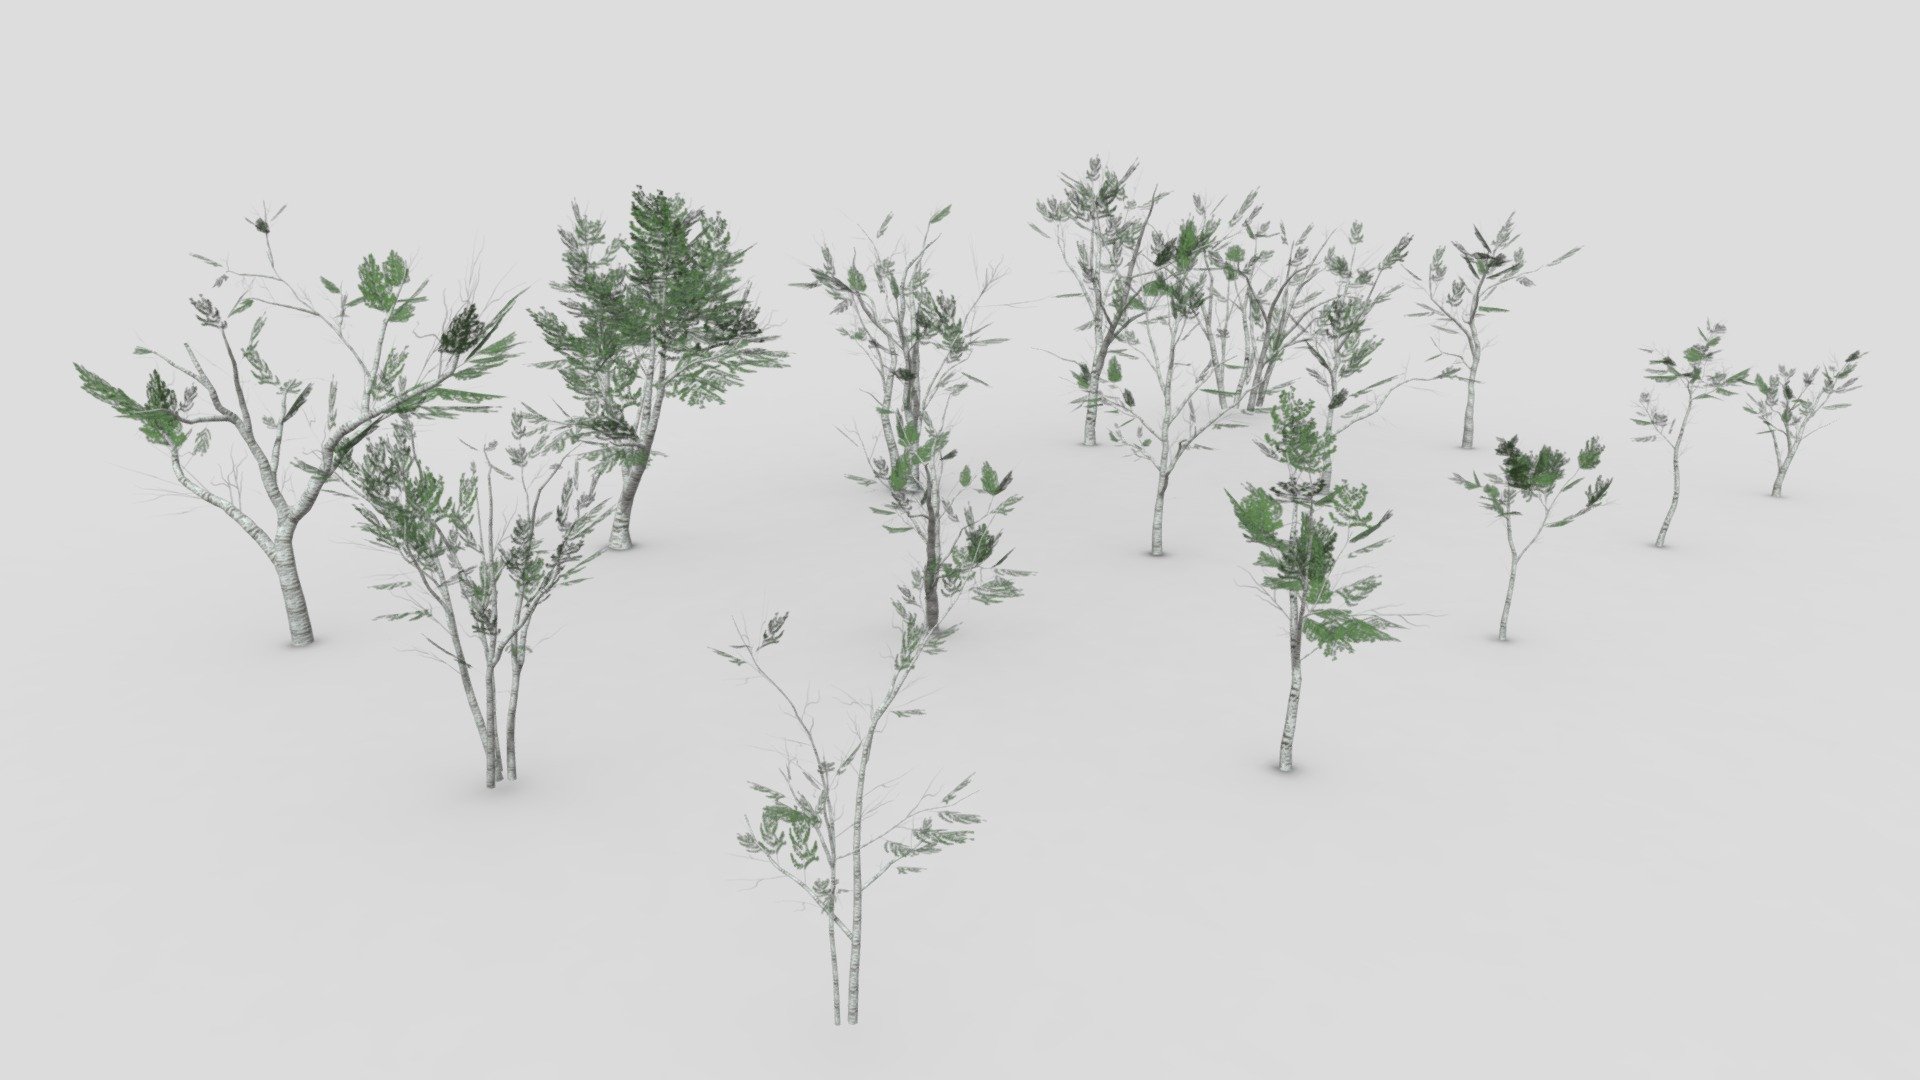 White Birch Collection-20
this is low poly collection of 15 withe birch tree to use it in your porject 3d model